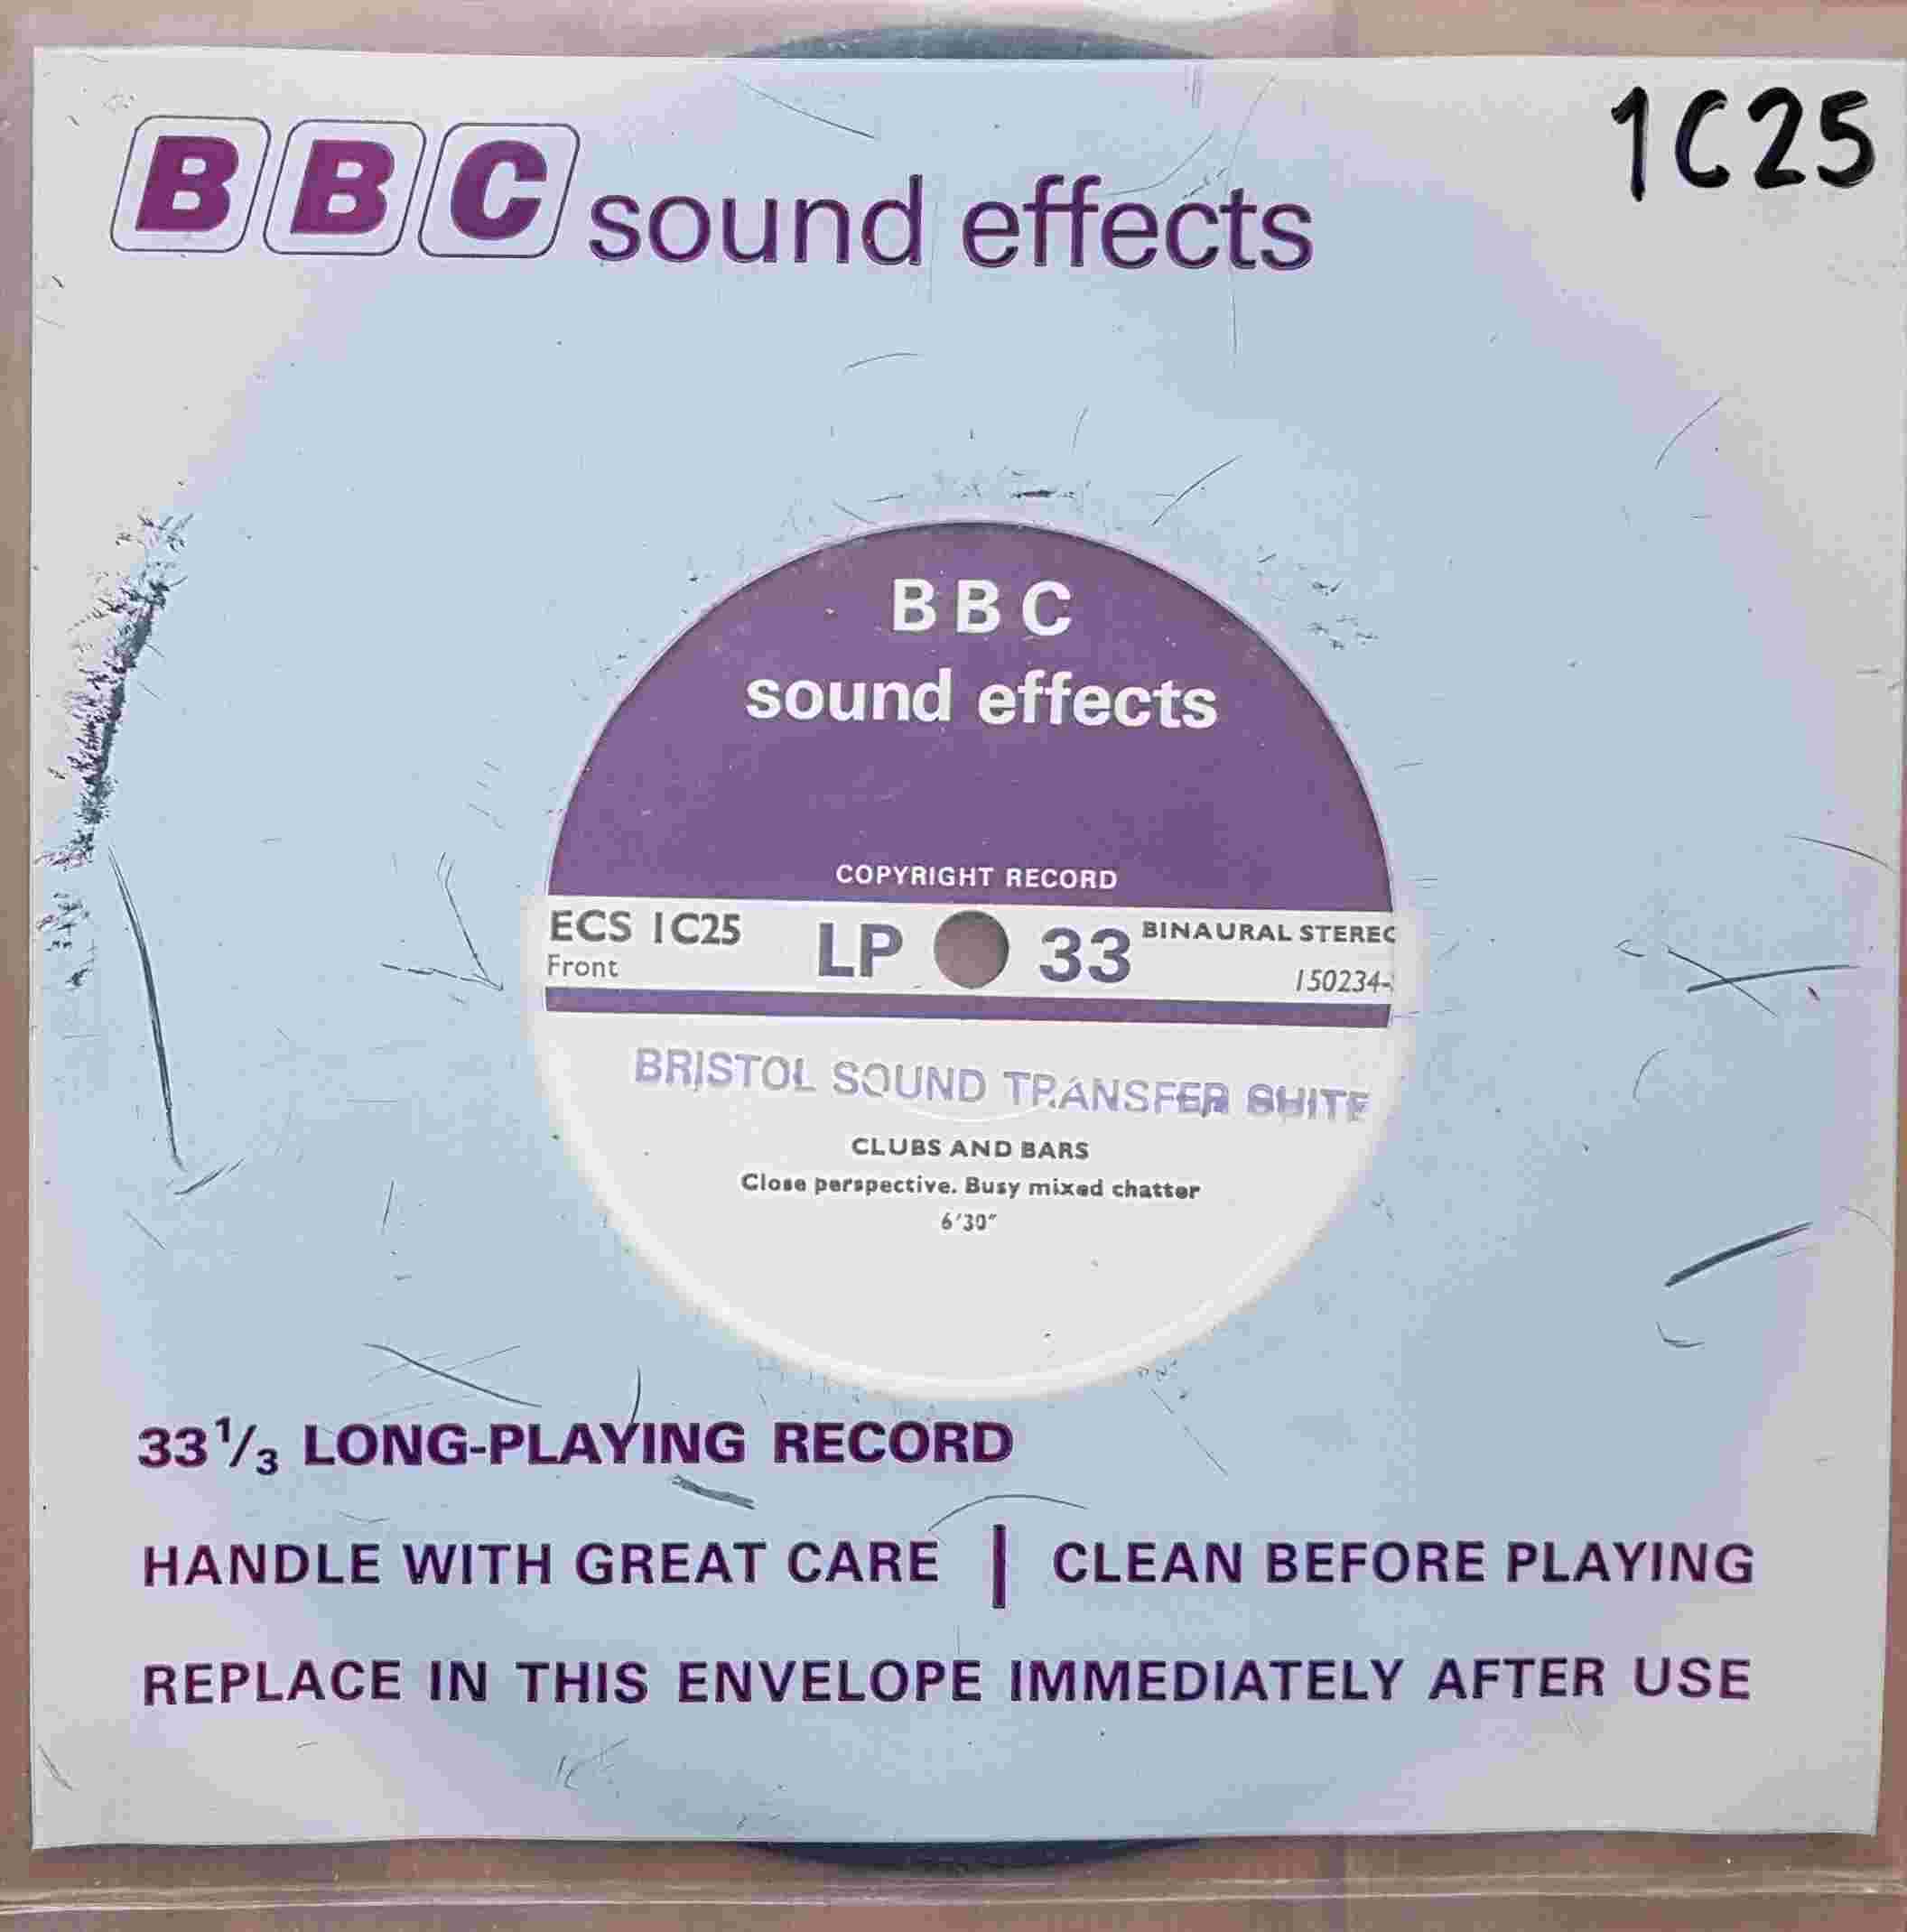 Picture of ECS 1C25 Clubs and bars by artist Not registered from the BBC singles - Records and Tapes library